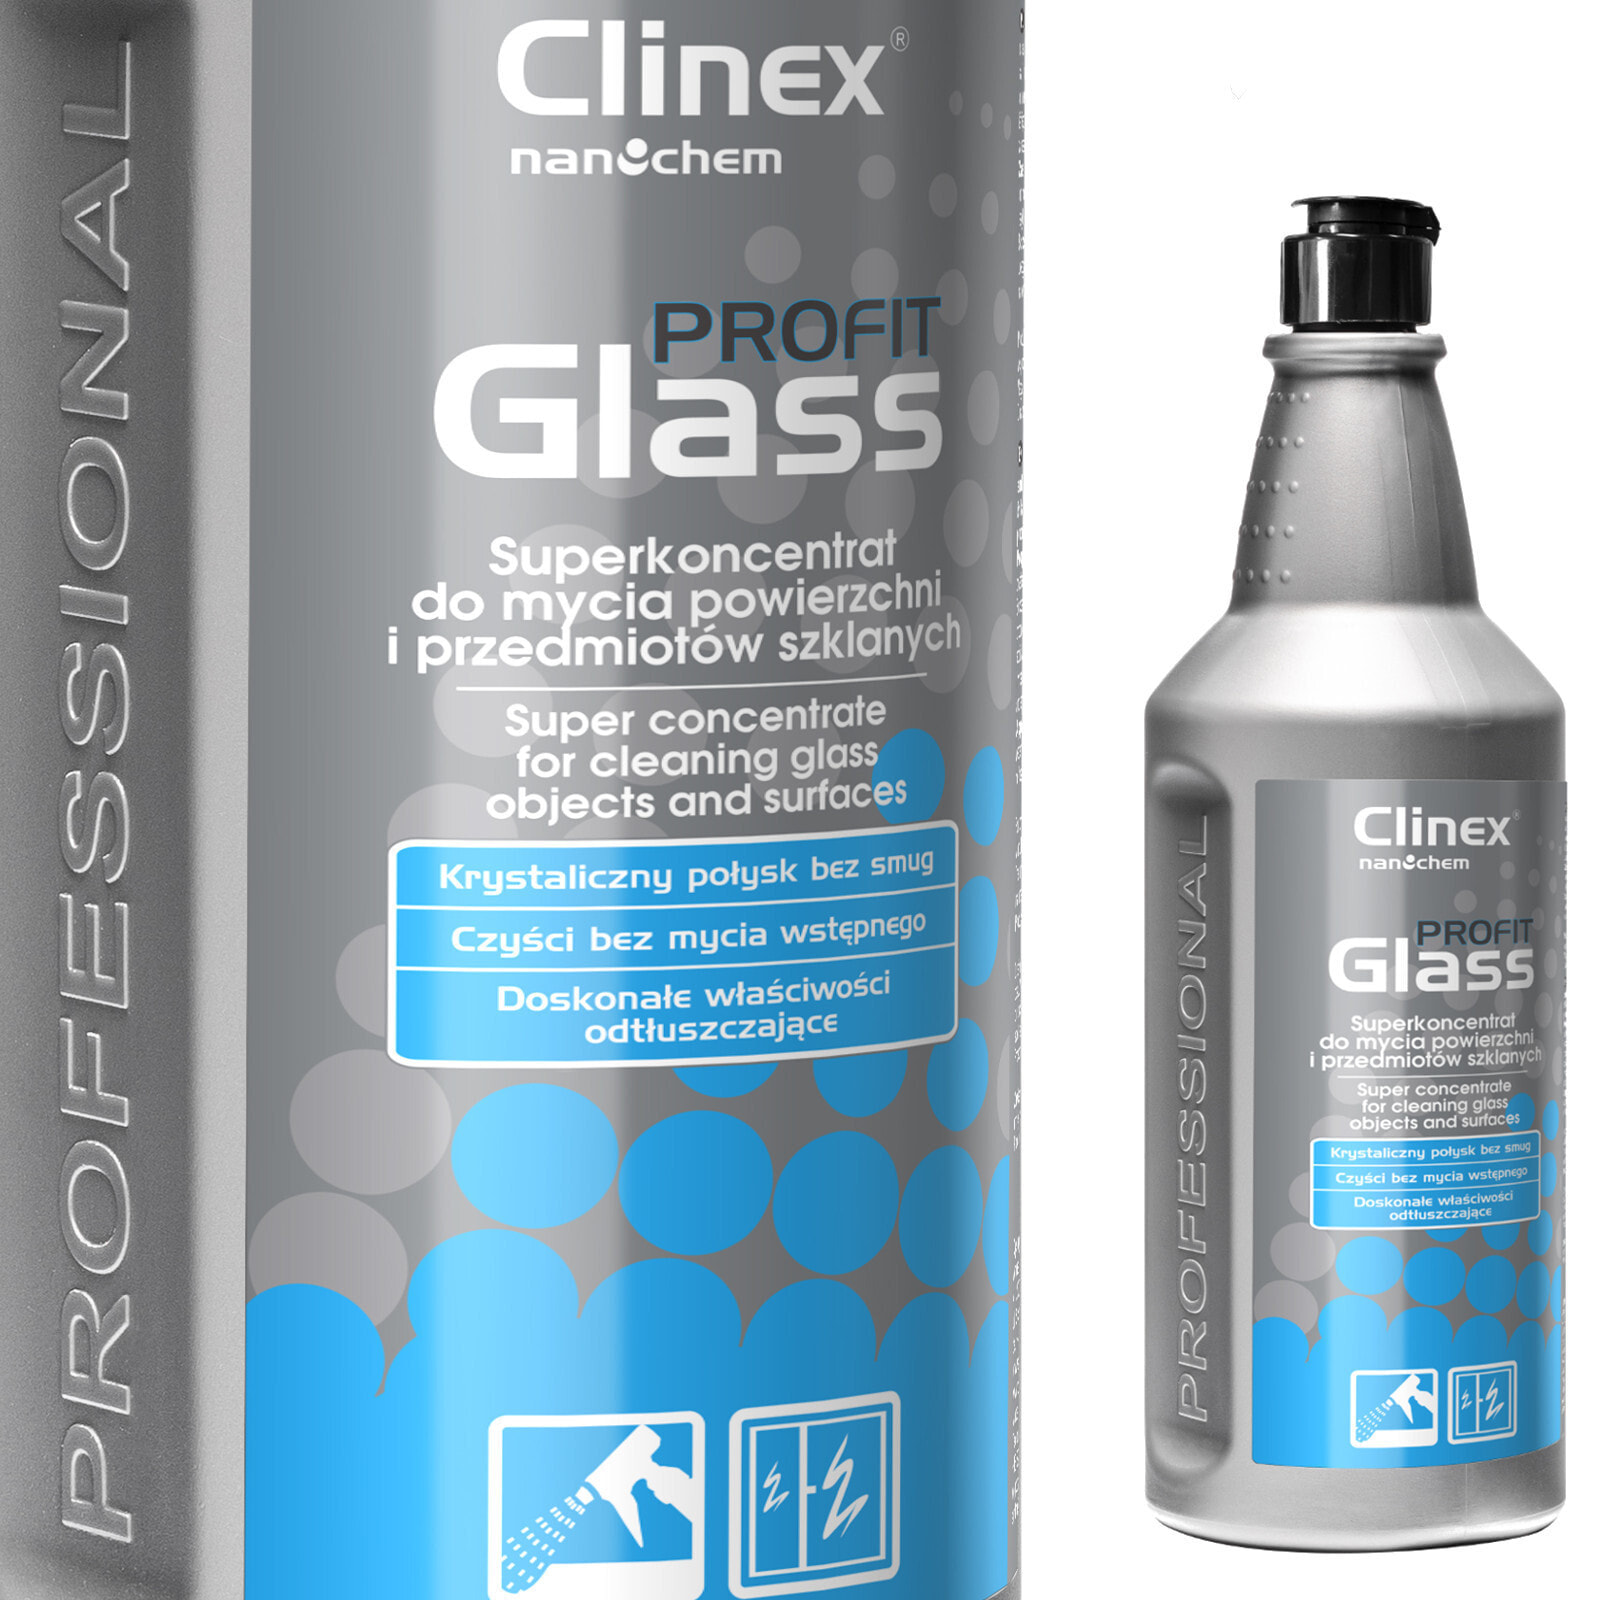 Effective concentrate for cleaning glass mirrors, stainless steel glass CLINEX PROFIT Glass 1L